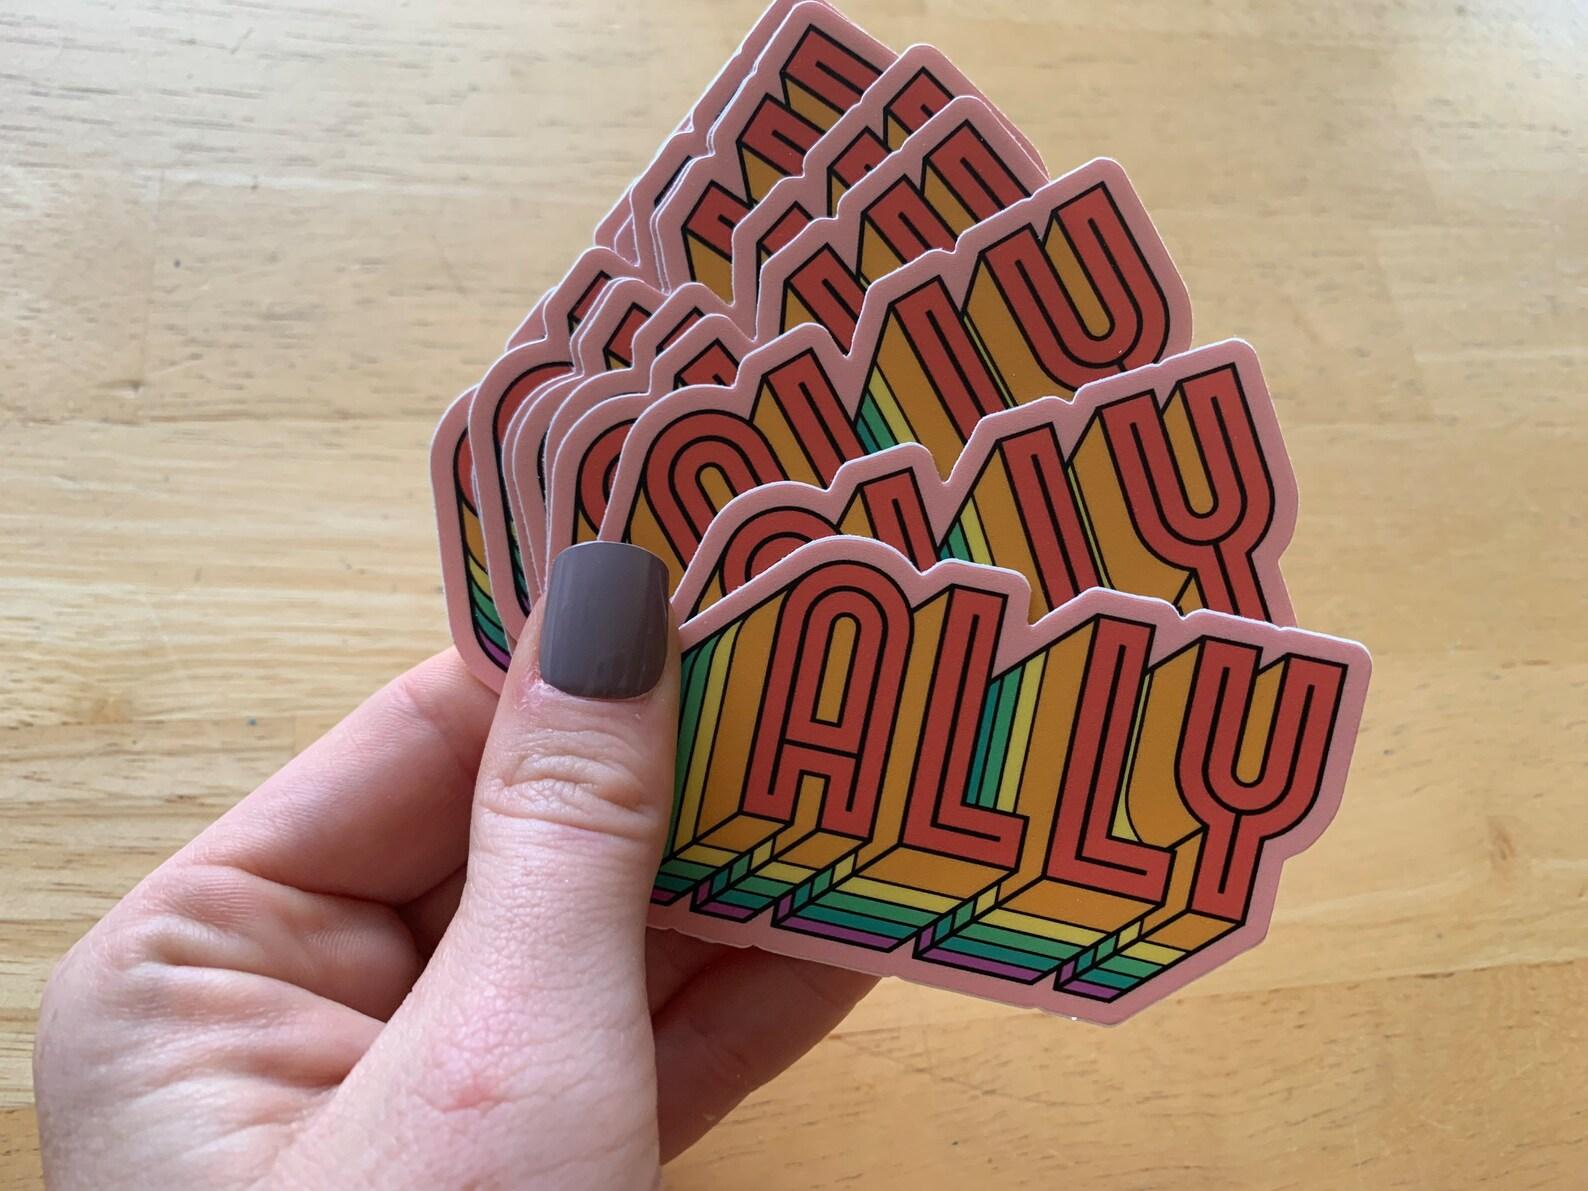 ALLY Pride Magnet - Gays+ Store